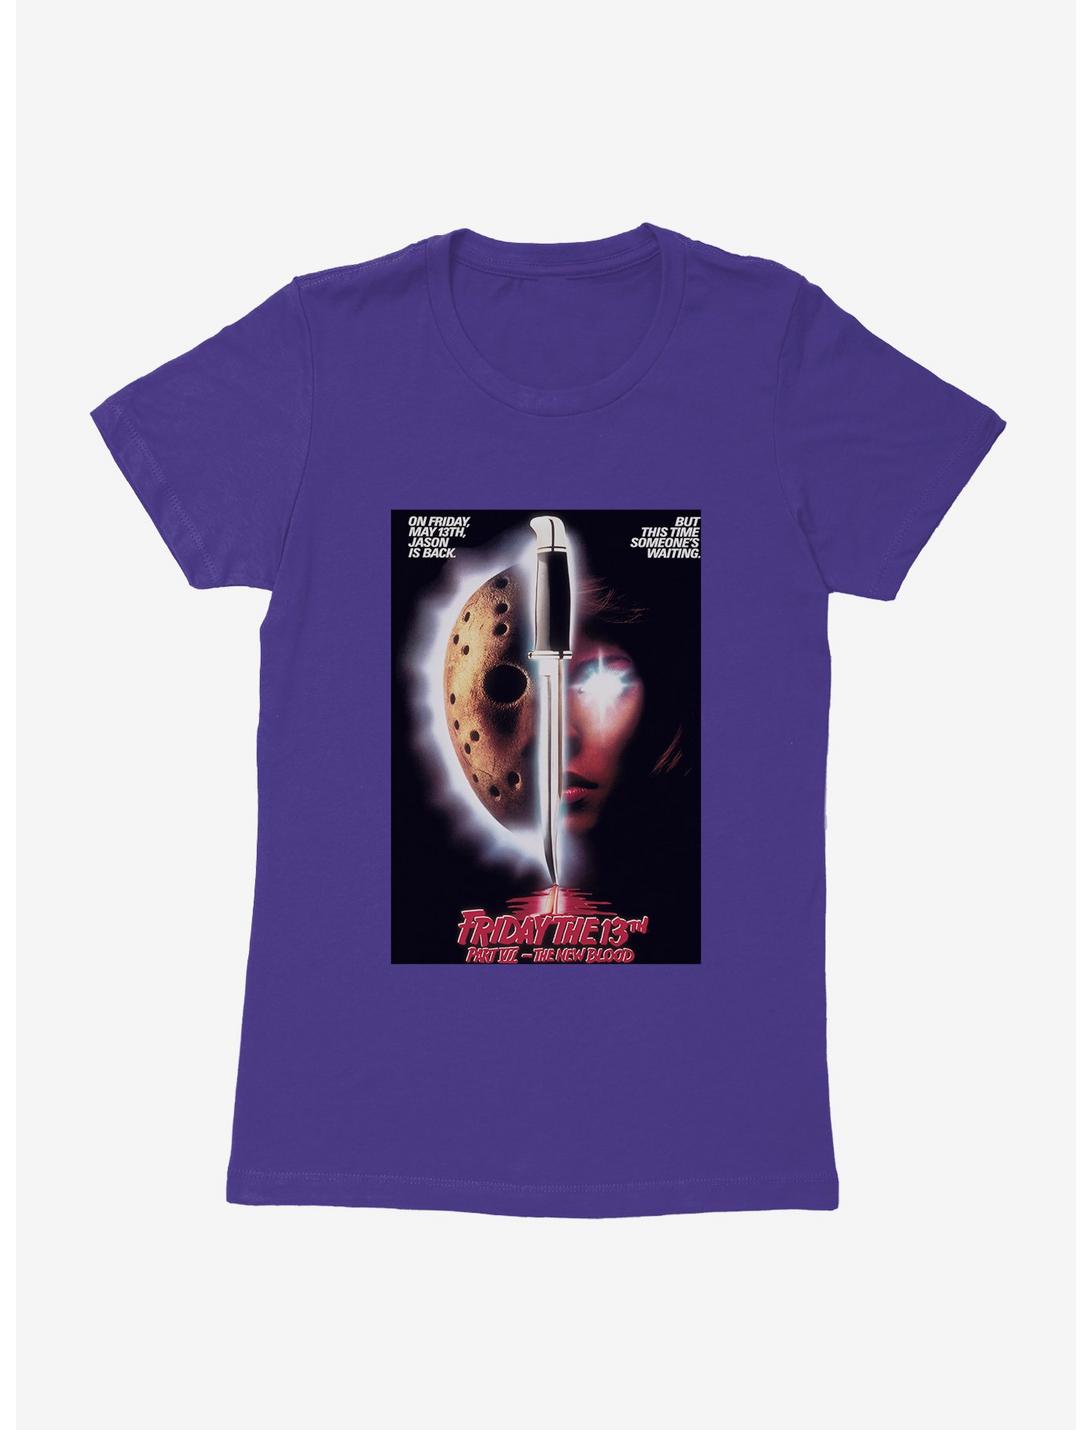 Friday The 13th Part VII Poster Womens T-Shirt, PURPLE RUSH, hi-res